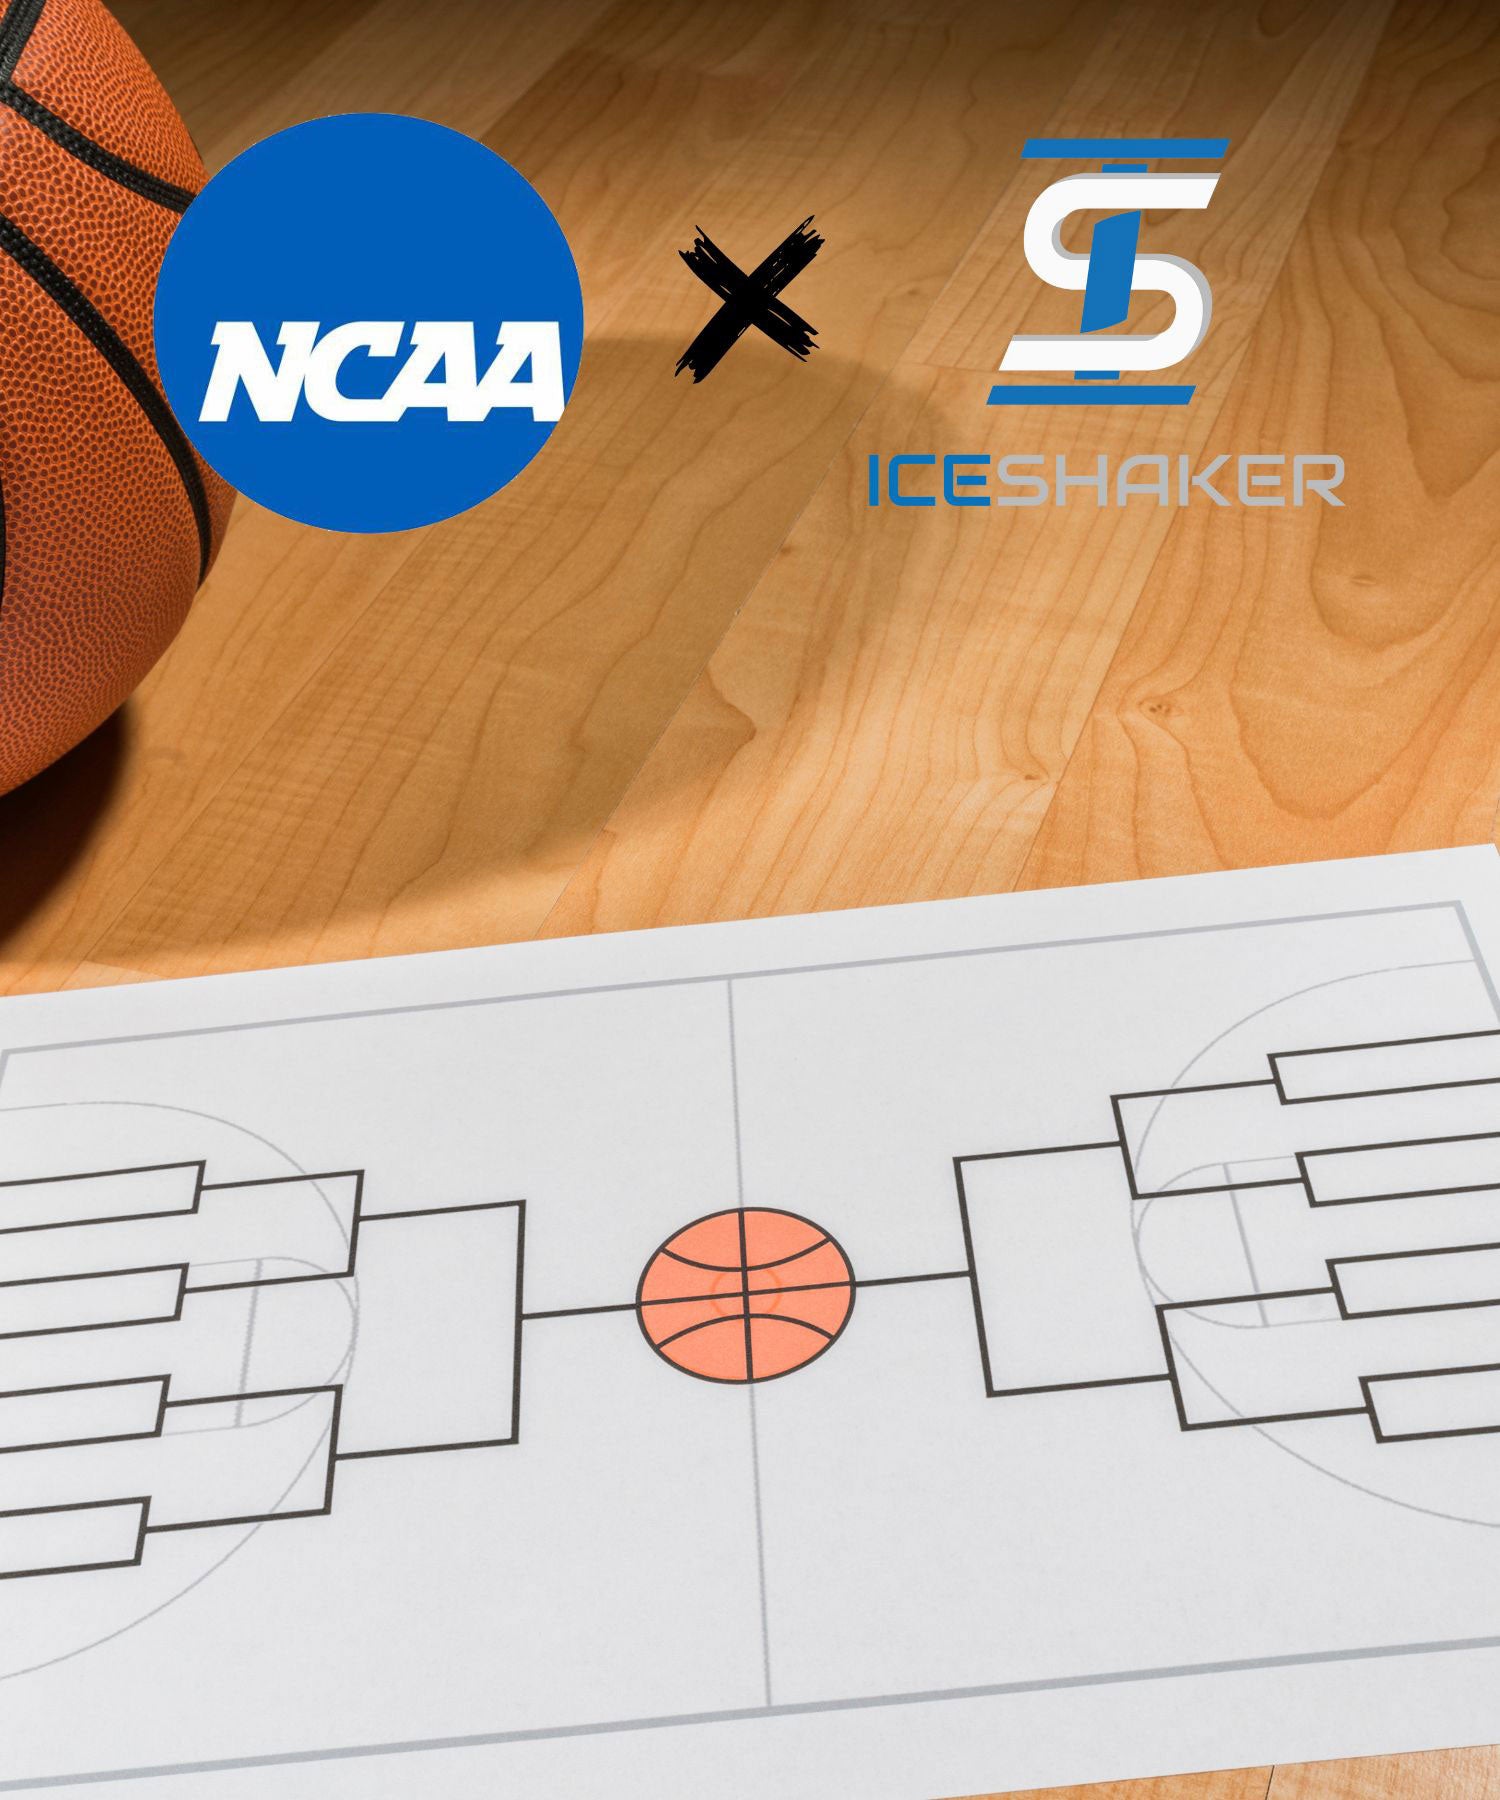 A website banner containing the official NCAA logo next to the Official Ice Shaker logo.